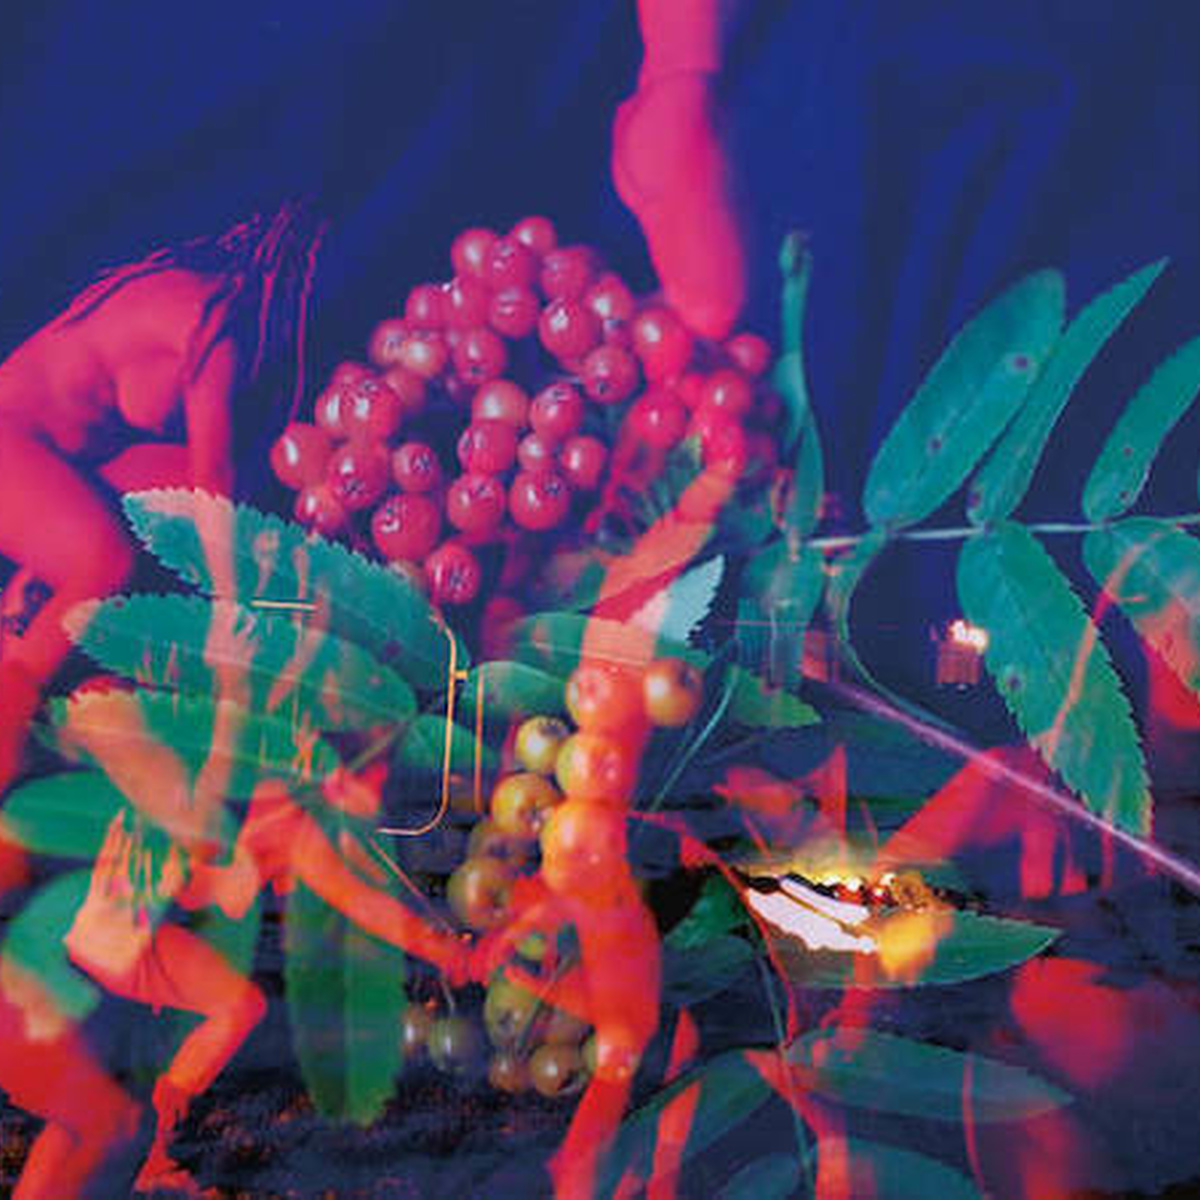 Vividly coloured overlayed images featuring bodies and plants.